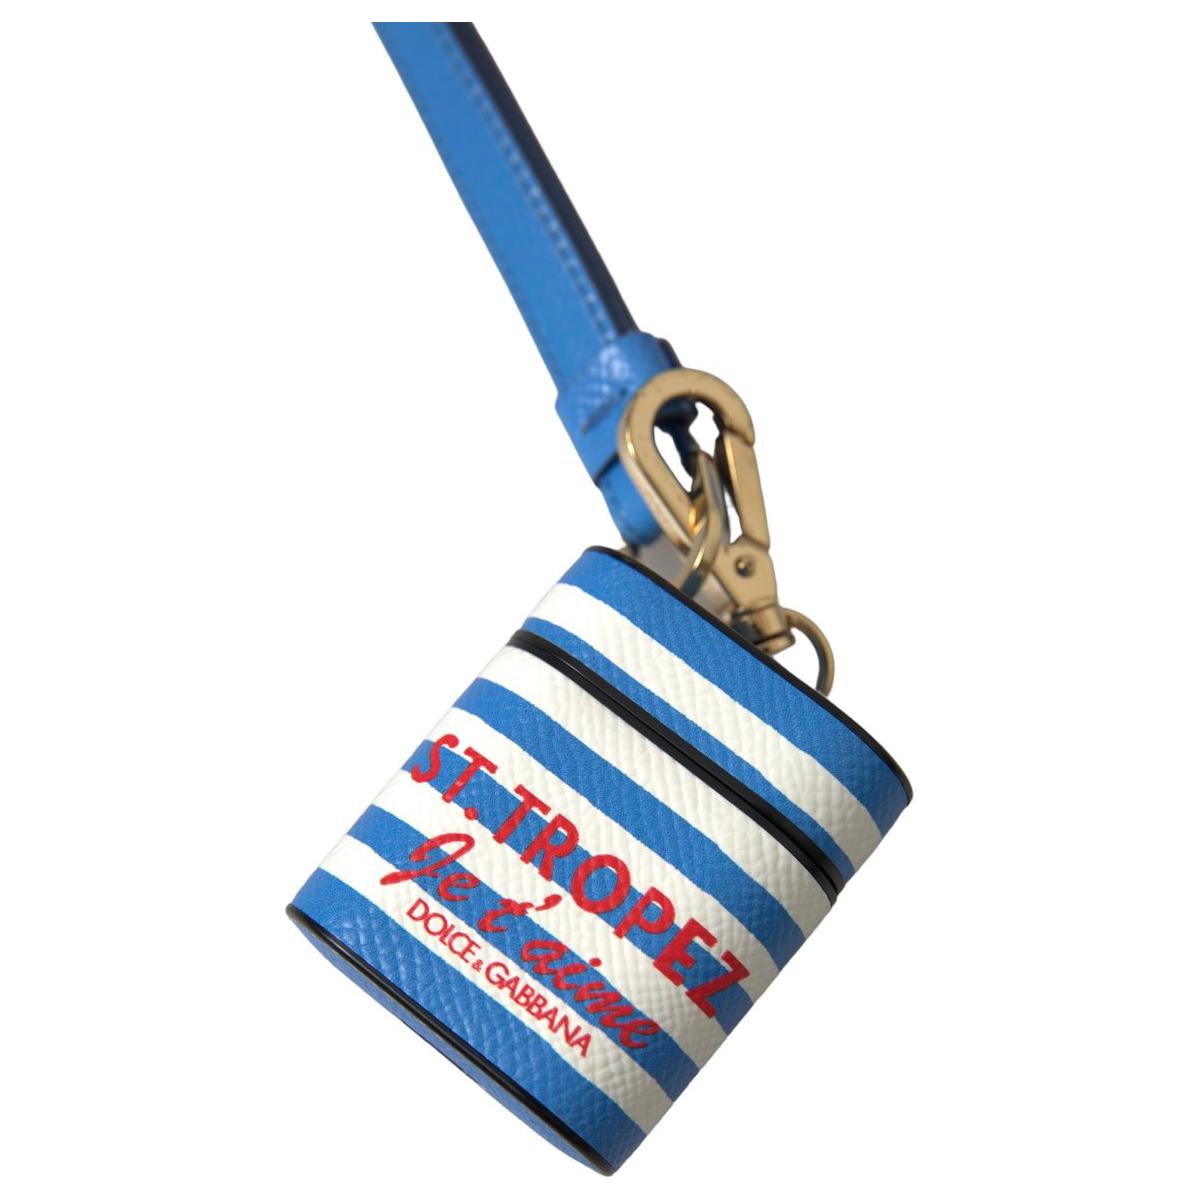 Dolce & Gabbana Chic Striped Leather Airpods Case blue-stripe-dauphine-leather-logo-print-airpod-case